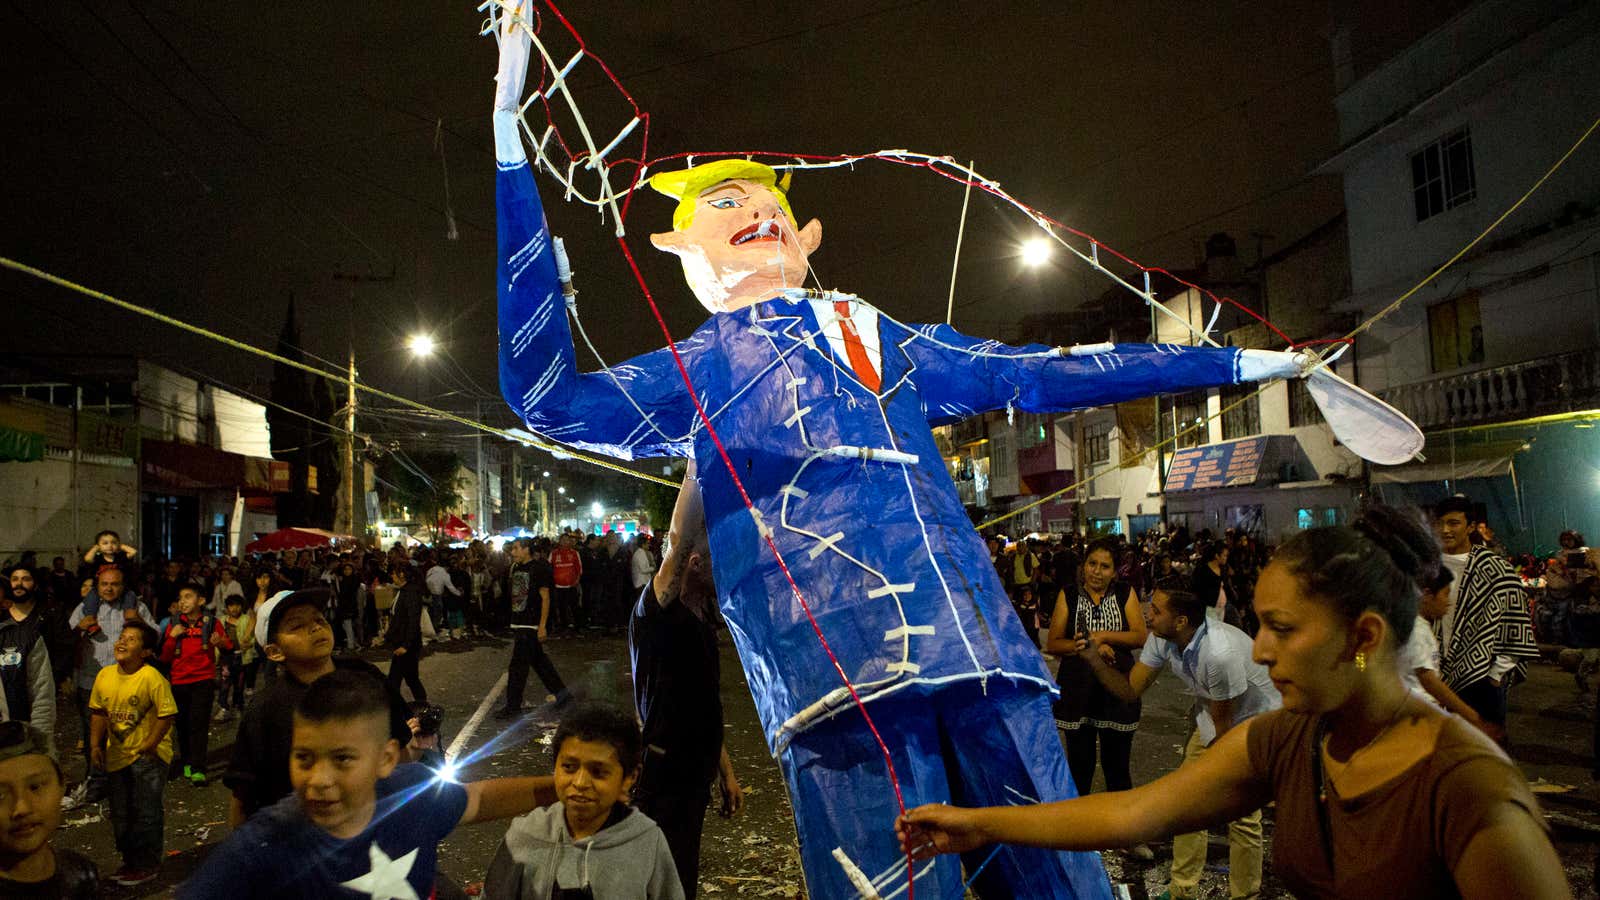 Donald Trump is burned in effigy in Mexico, the country that will “eventually, but at a later date…be paying, in some form, for the badly needed border wall.”